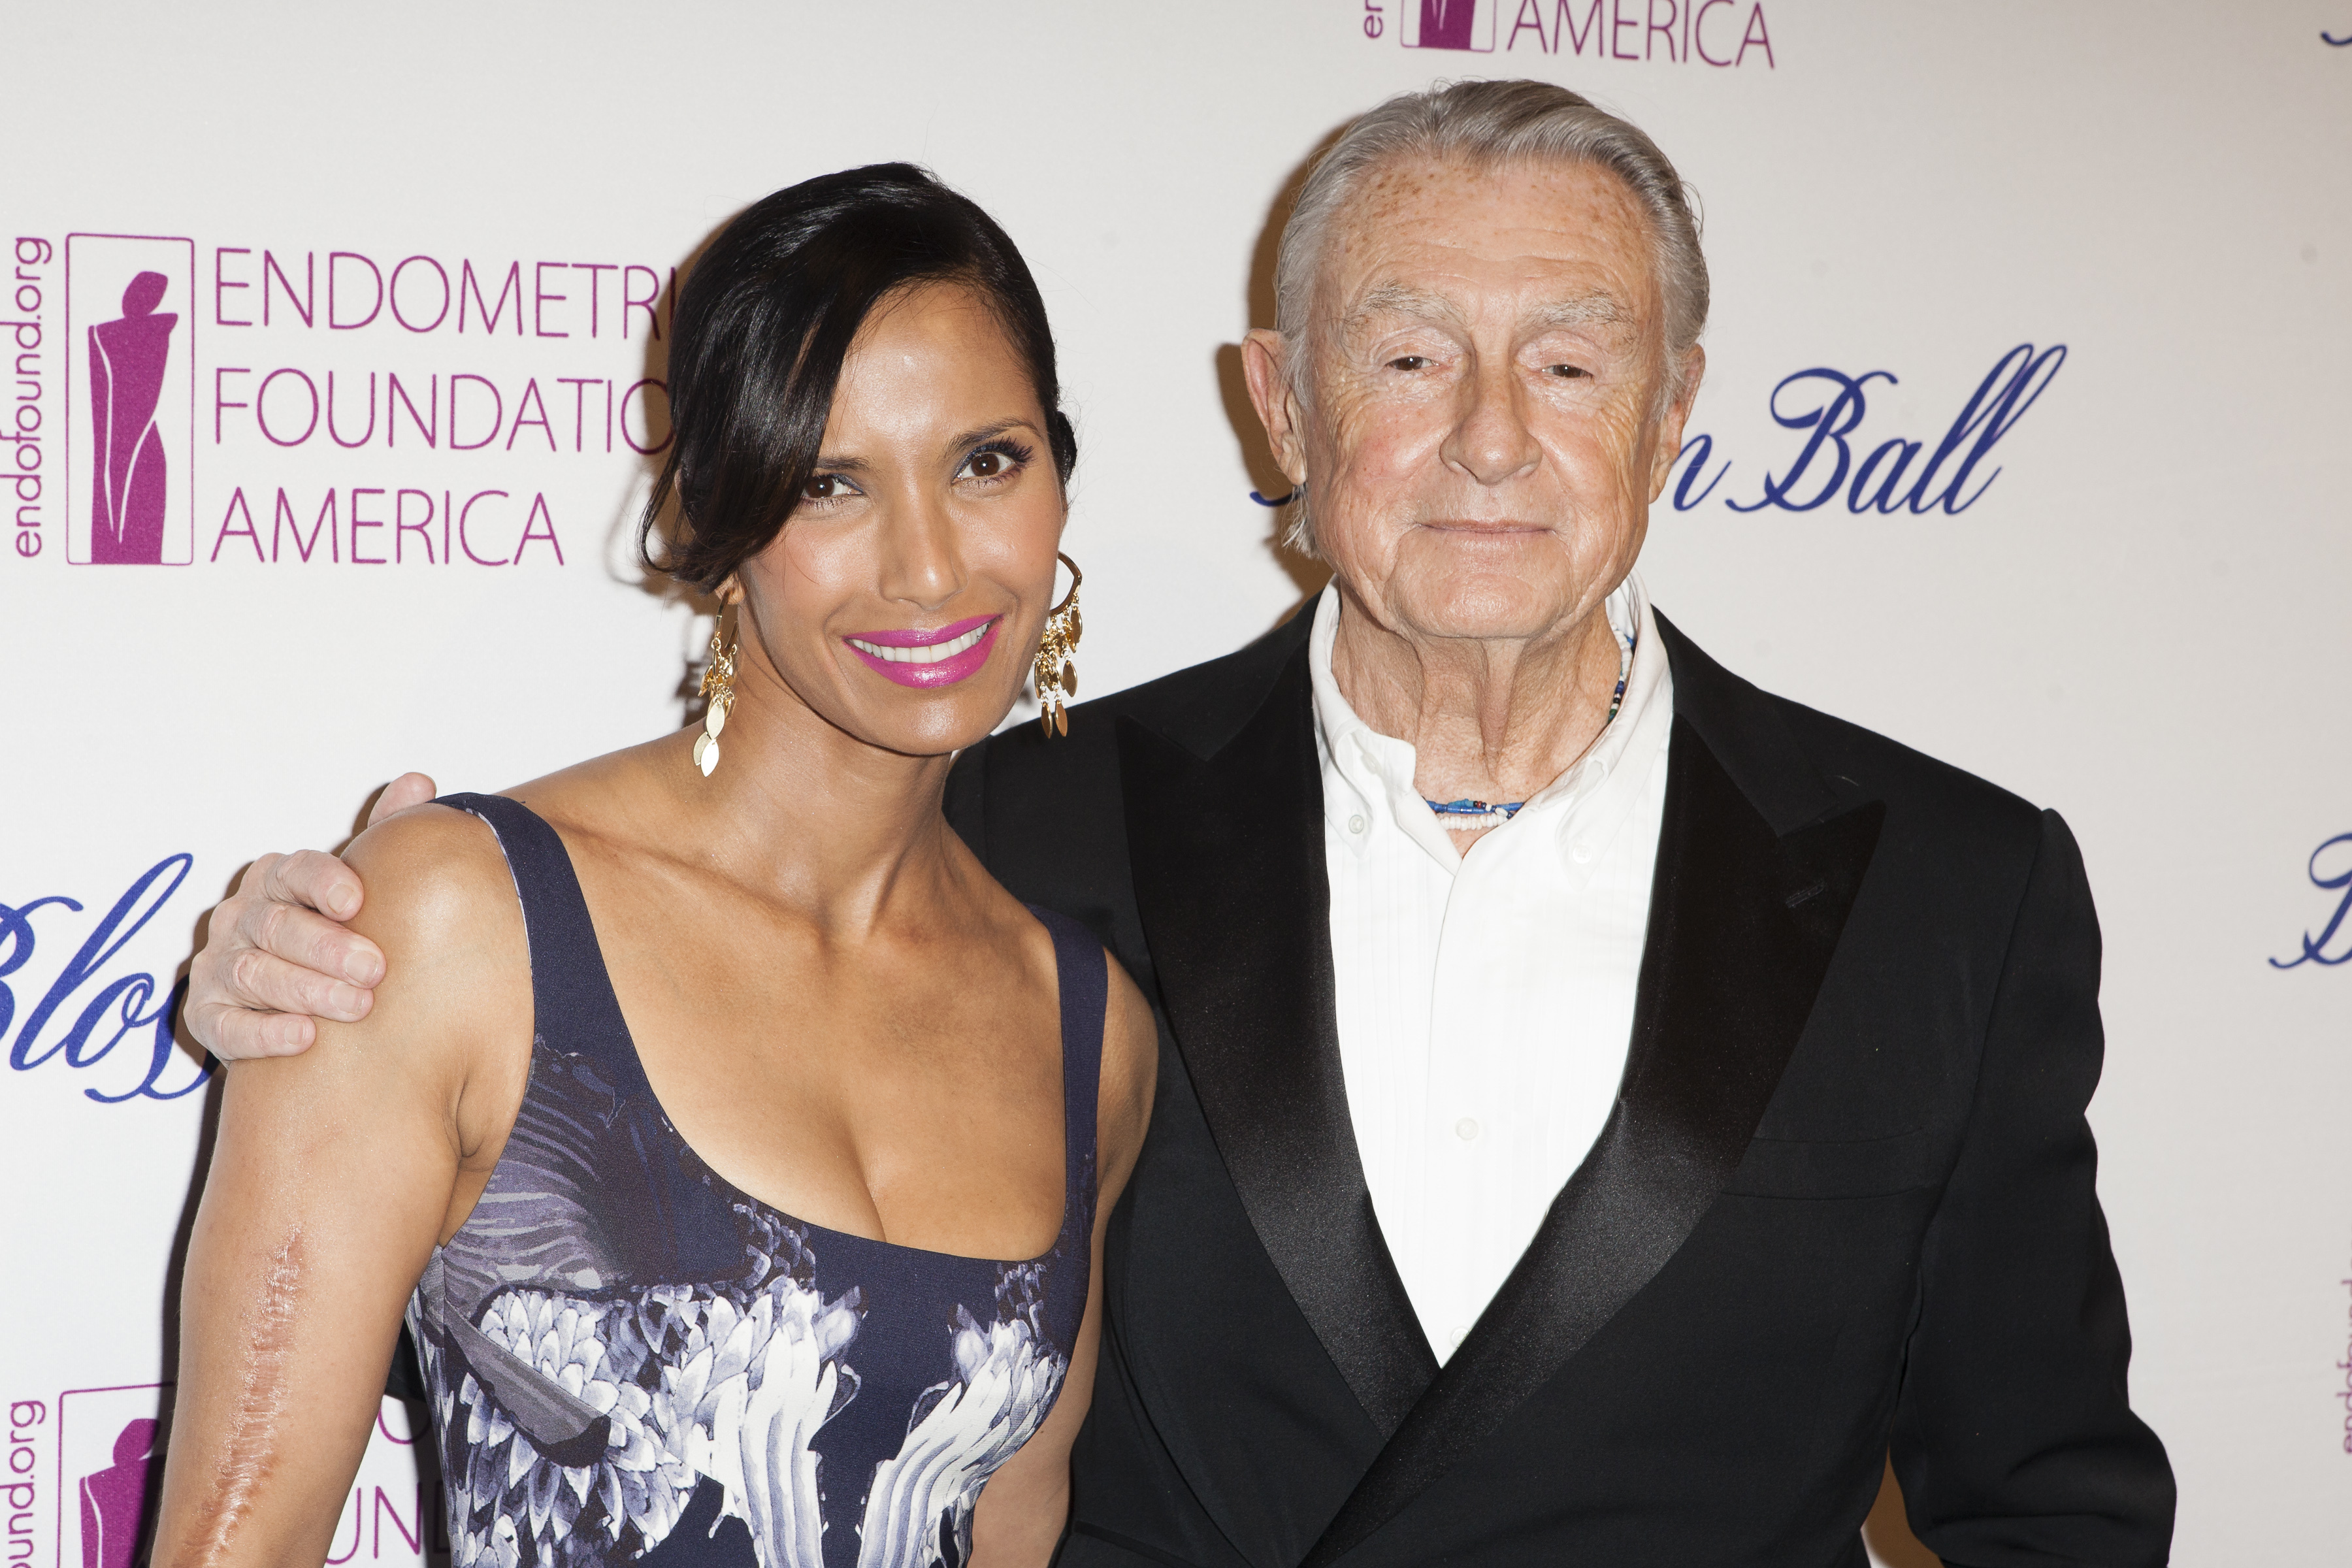 ***FILE PHOTO*** Director Joel Schumacher Has Passed Away at 80. NEW YORK, NY - MARCH 11: Padma Lakshmi and Joel Schumacher attend The Endometriosis Foundation of America's Celebration of The 5th Annual Blossom Ball at Capitale on March 11, 2013 in New York City. Credit: Corredor99/MediaPunch /IPX